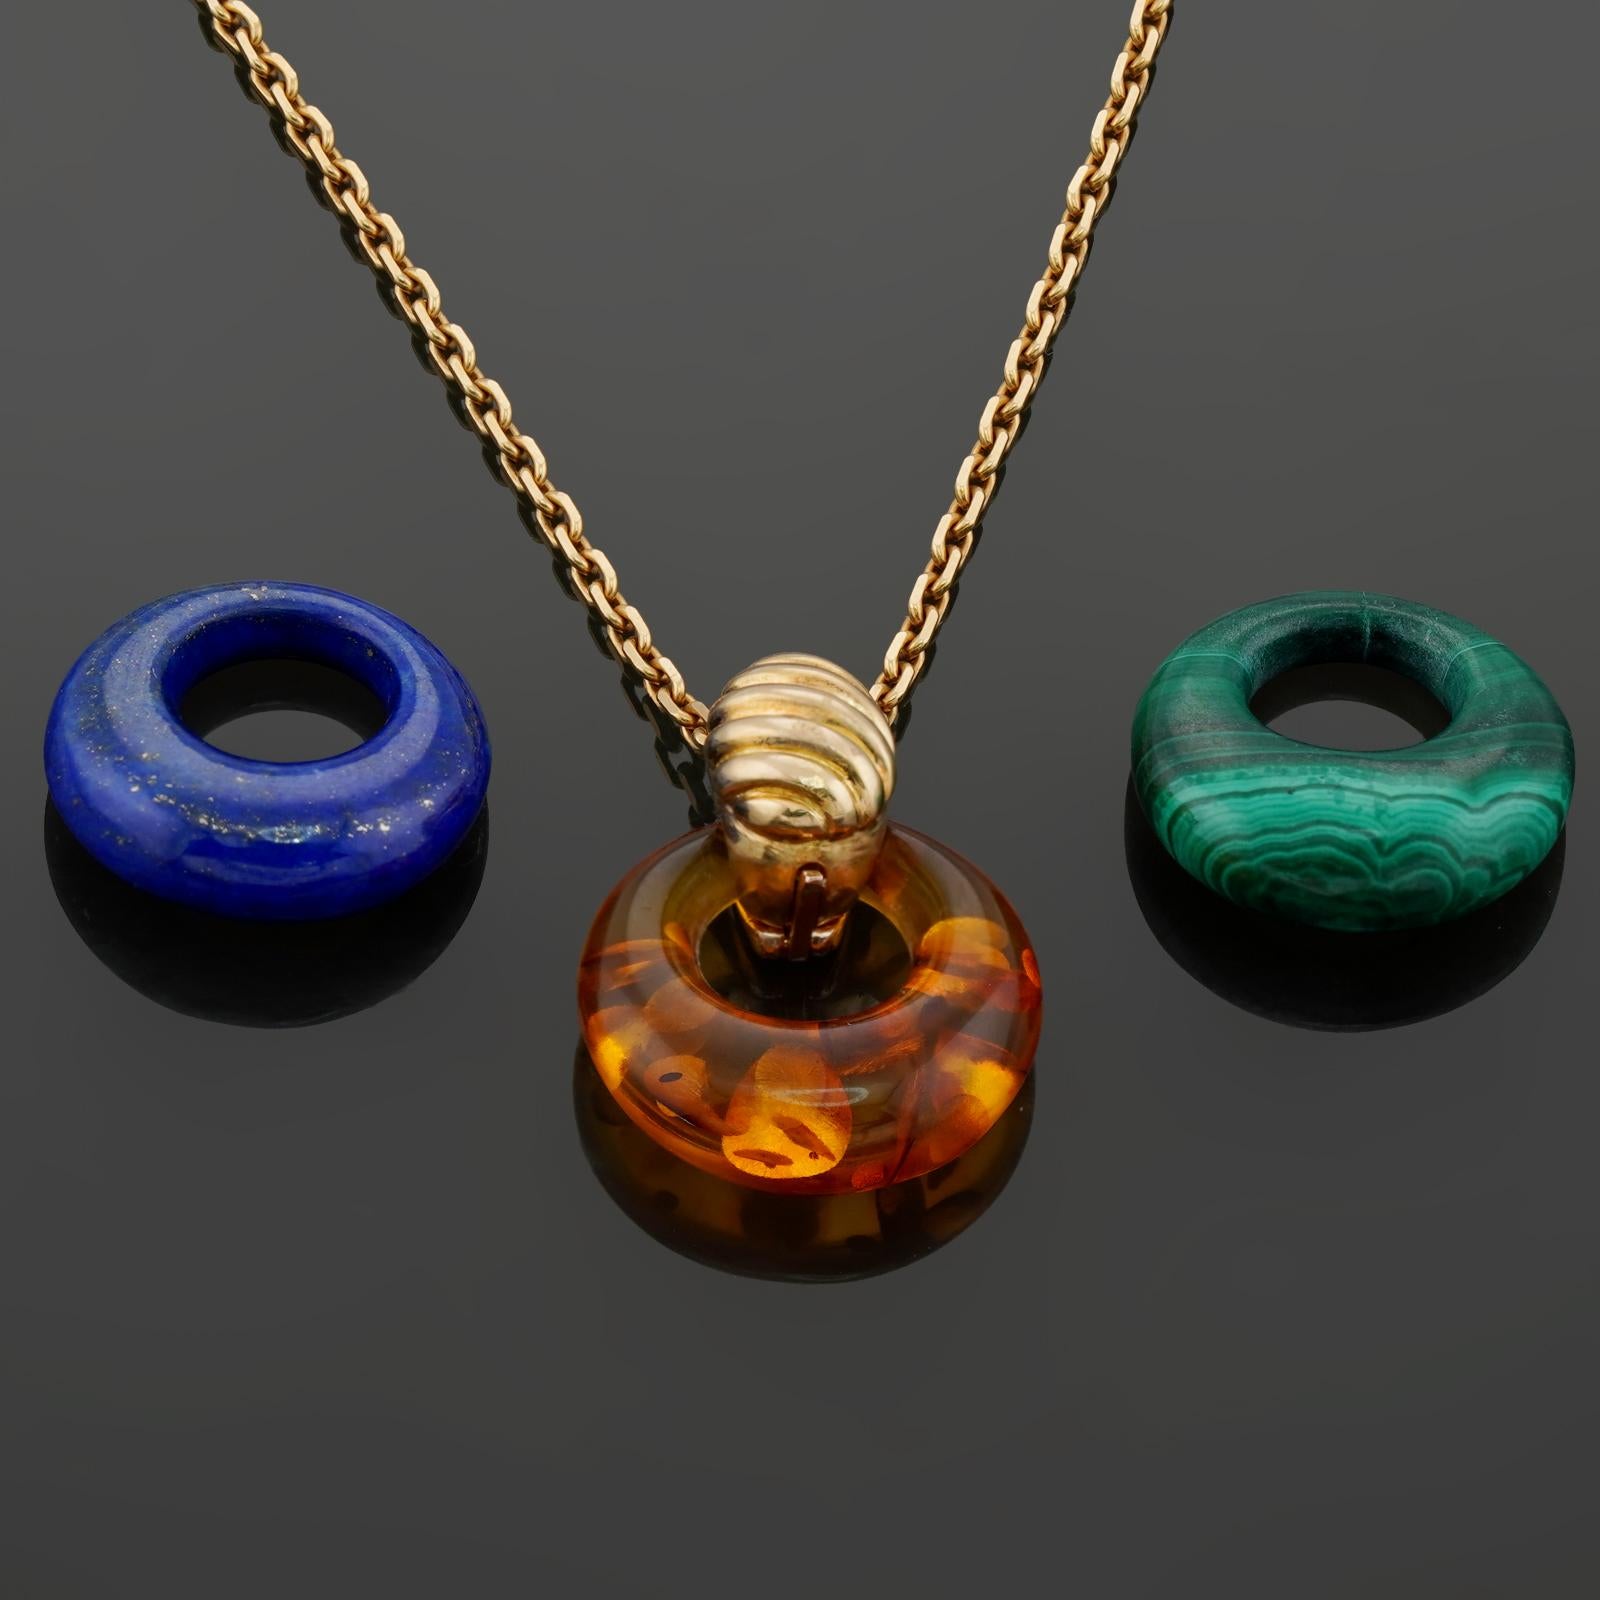 This gorgeous and versatile Van Cleef & Arpels necklace is crafted in 18k yellow gold and features 3 interchangable circular enhancer pendants crafted in amber, malachite, and lapis lazuli. Made in France circa 1980s. Measurements: 0.43